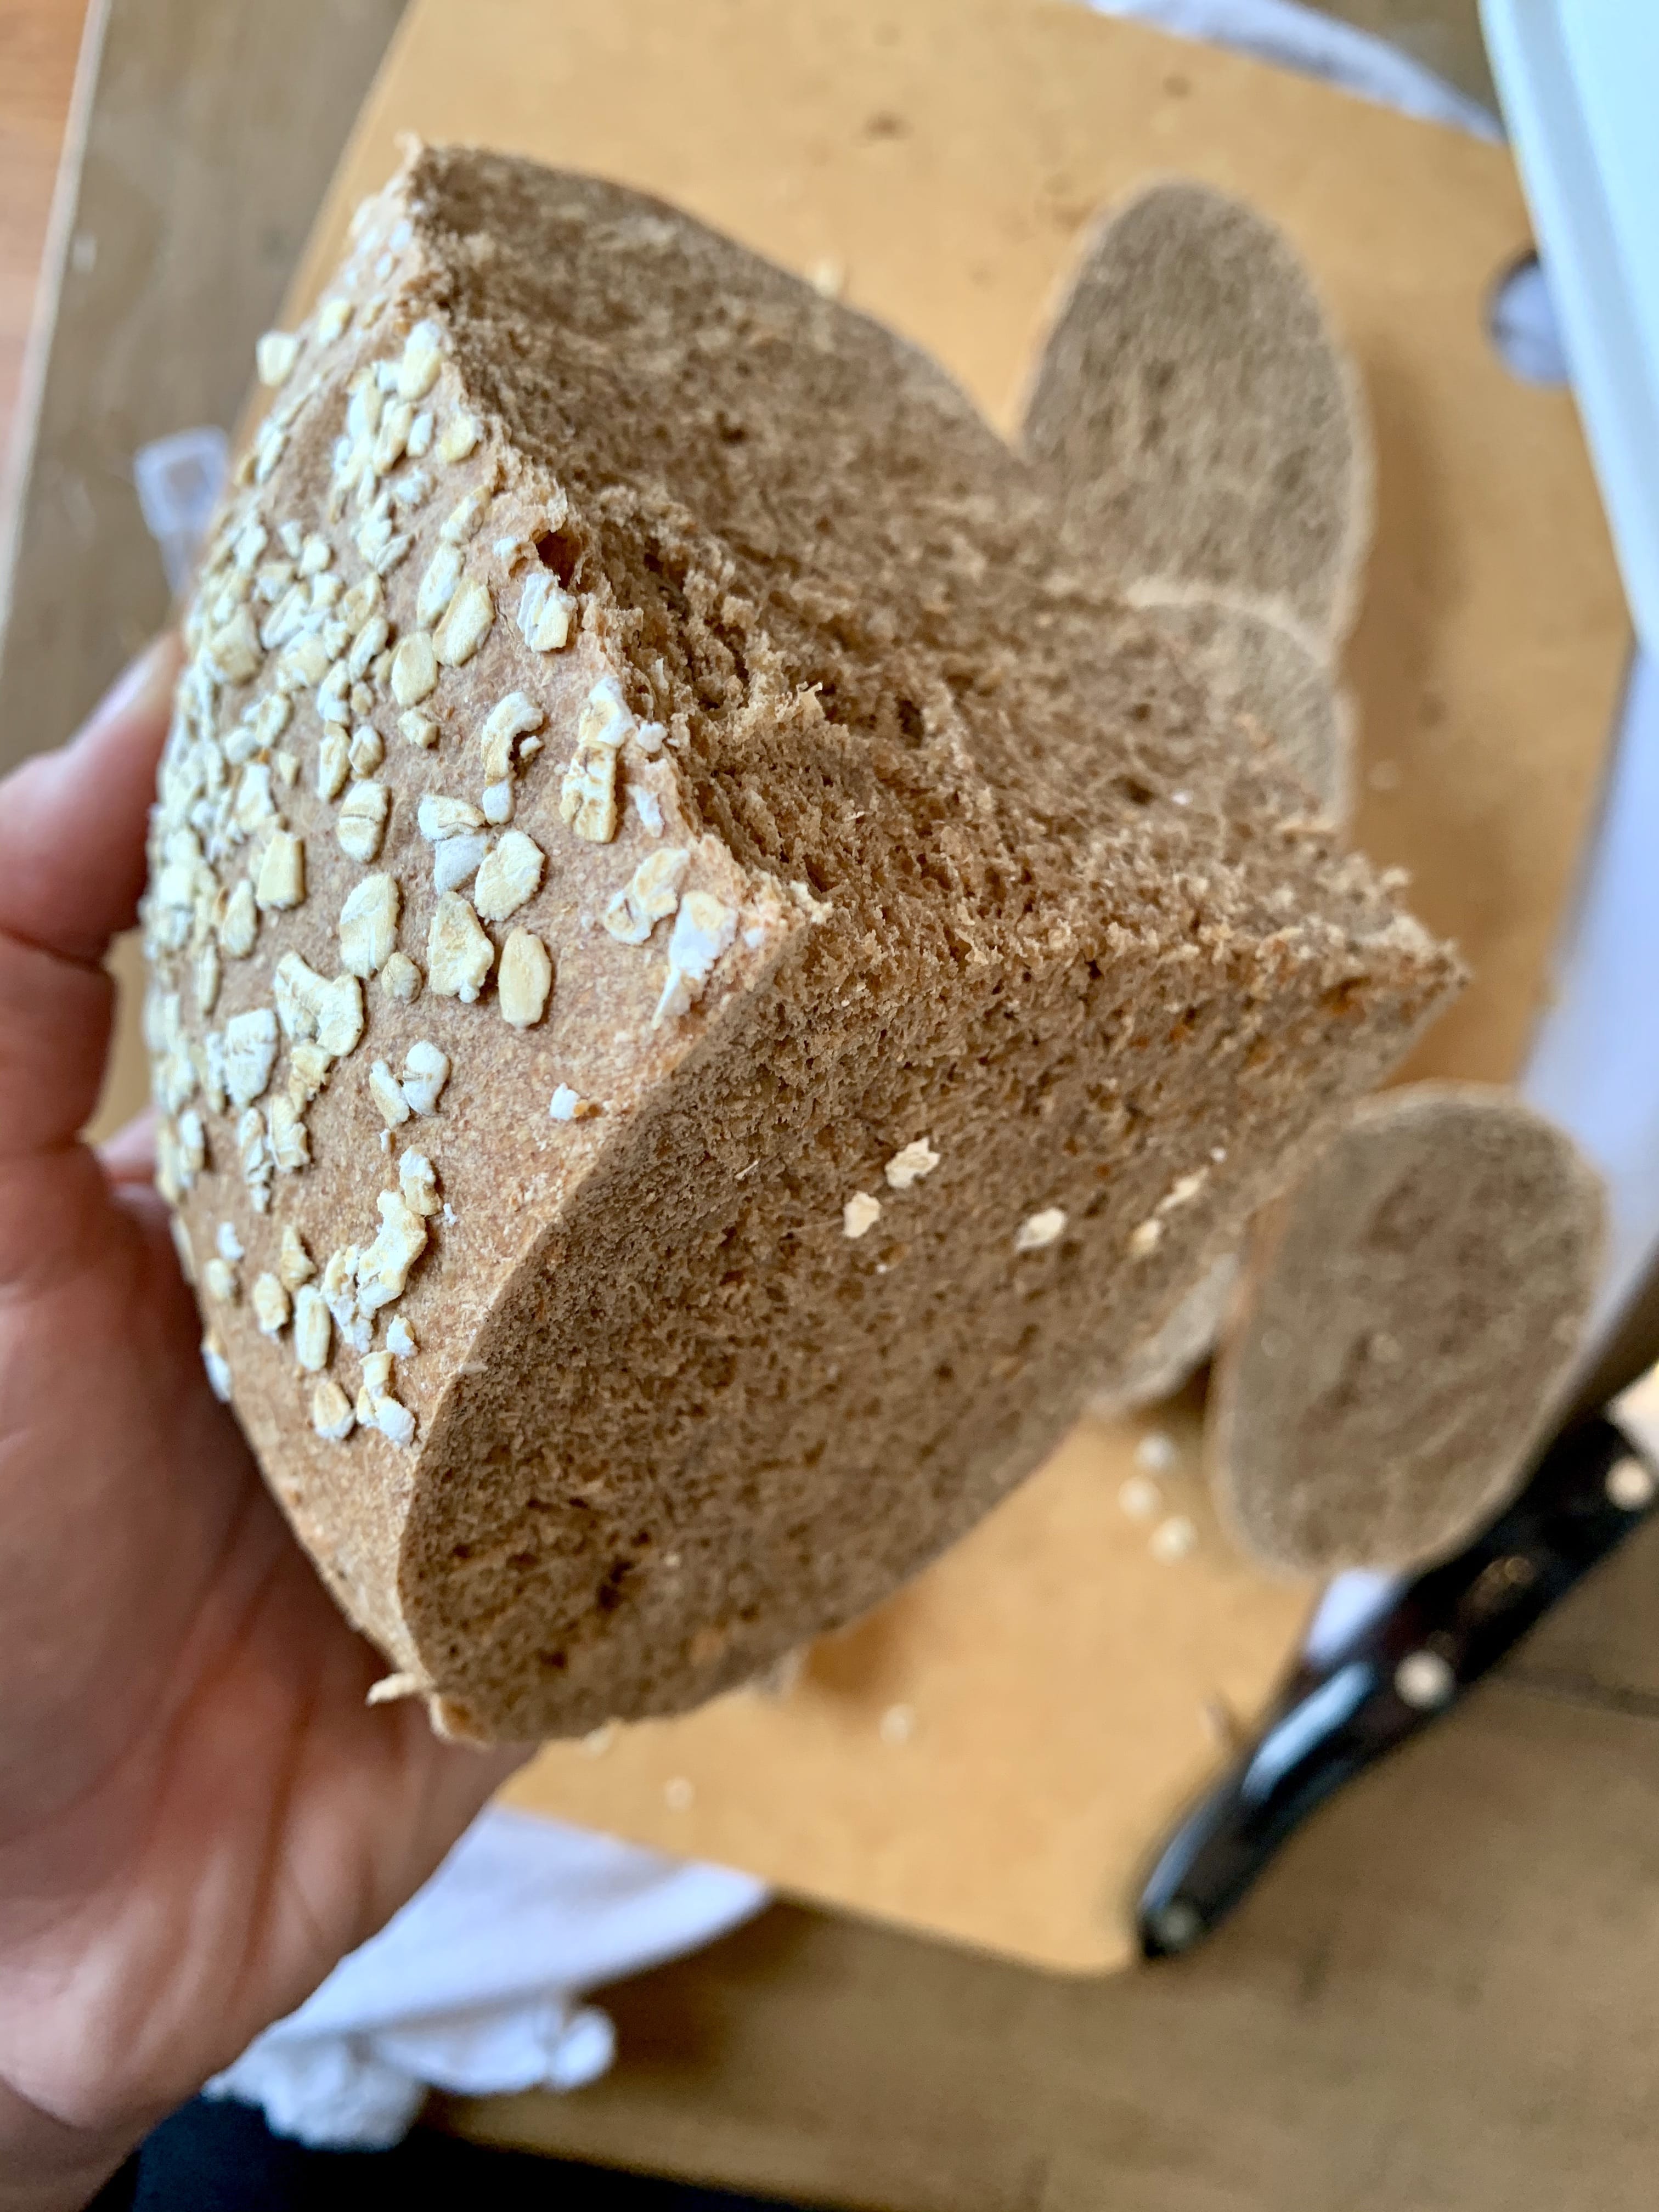 Hearty Brown Bread